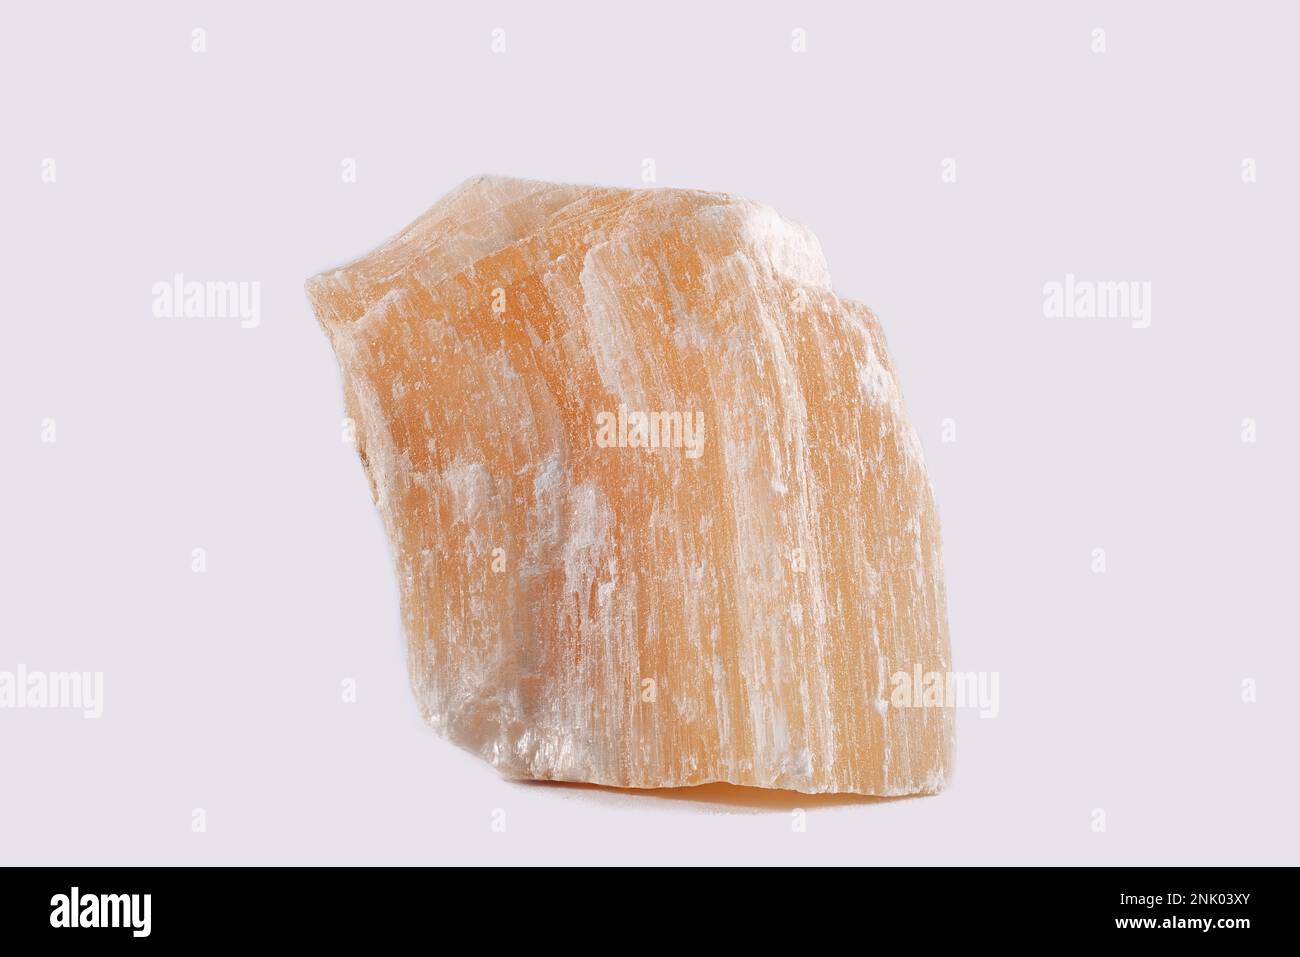 Gypsum is a soft sulfate mineral composed of calcium sulfate dihydrate. It is widely mined and used as a fertilizer.  Sample of red gypsym is from Mor Stock Photo